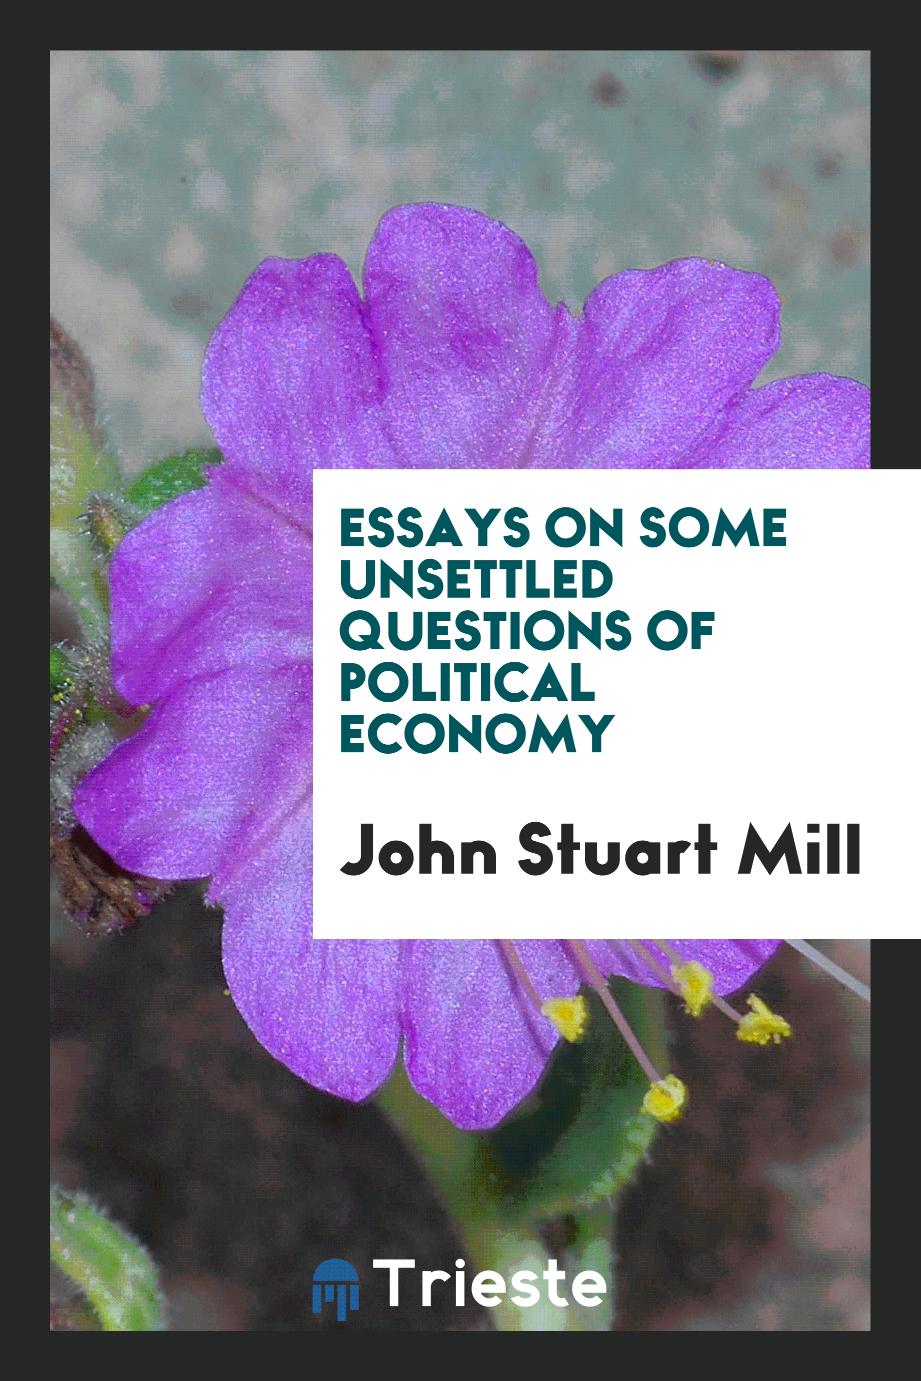 John Stuart Mill - Essays on Some Unsettled Questions of Political Economy